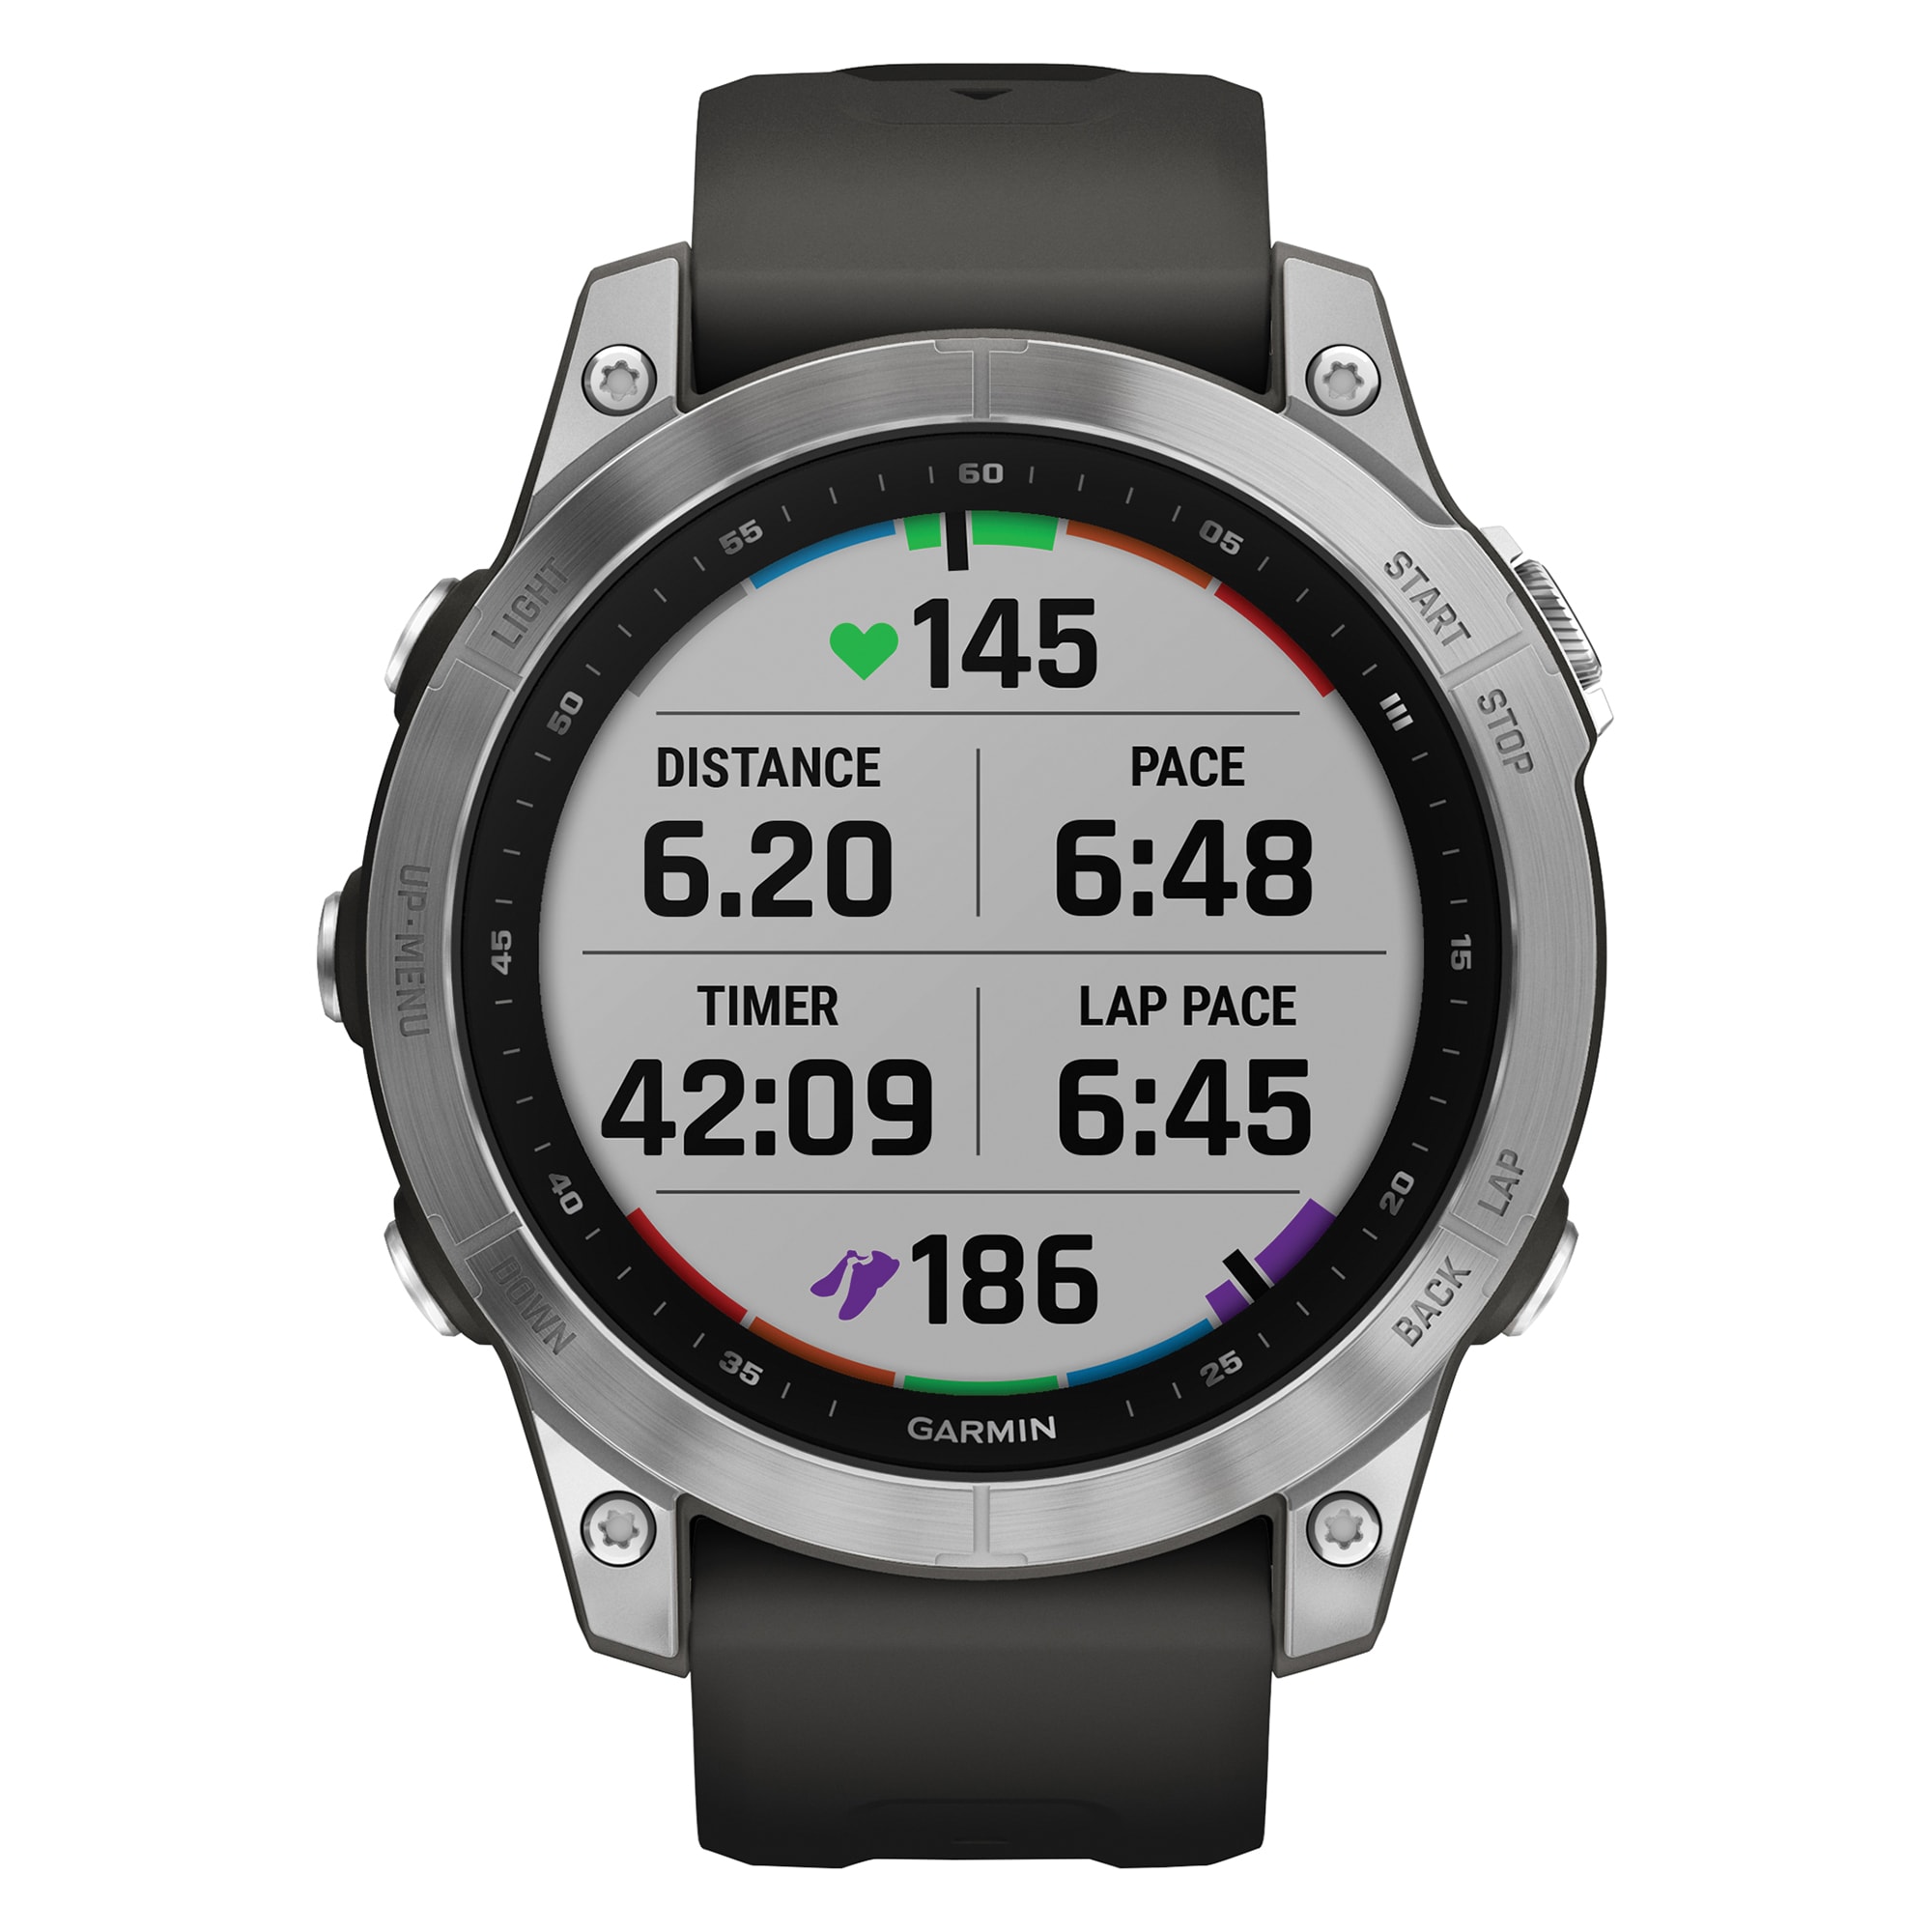 Monitor the fenix department Counter, in Garmin Gps Trackers Enabled at Step Watch with Fitness Smart and Heart 7 Rate